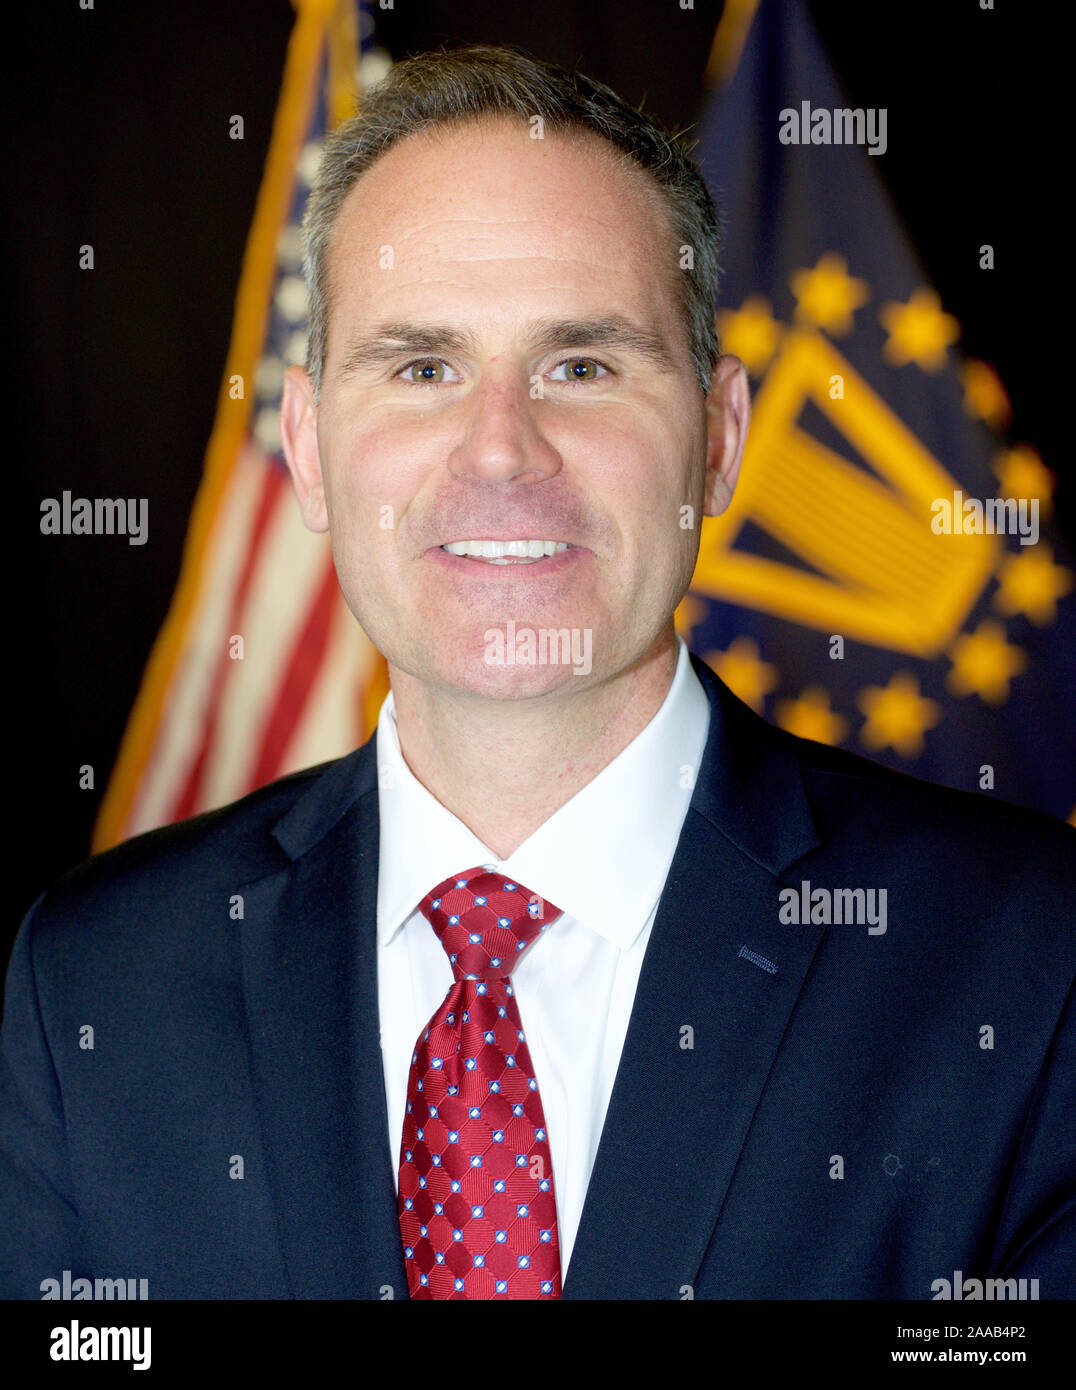 Chris Pilkerton Acting Administrator of the United States Small Business Administration Stock Photo